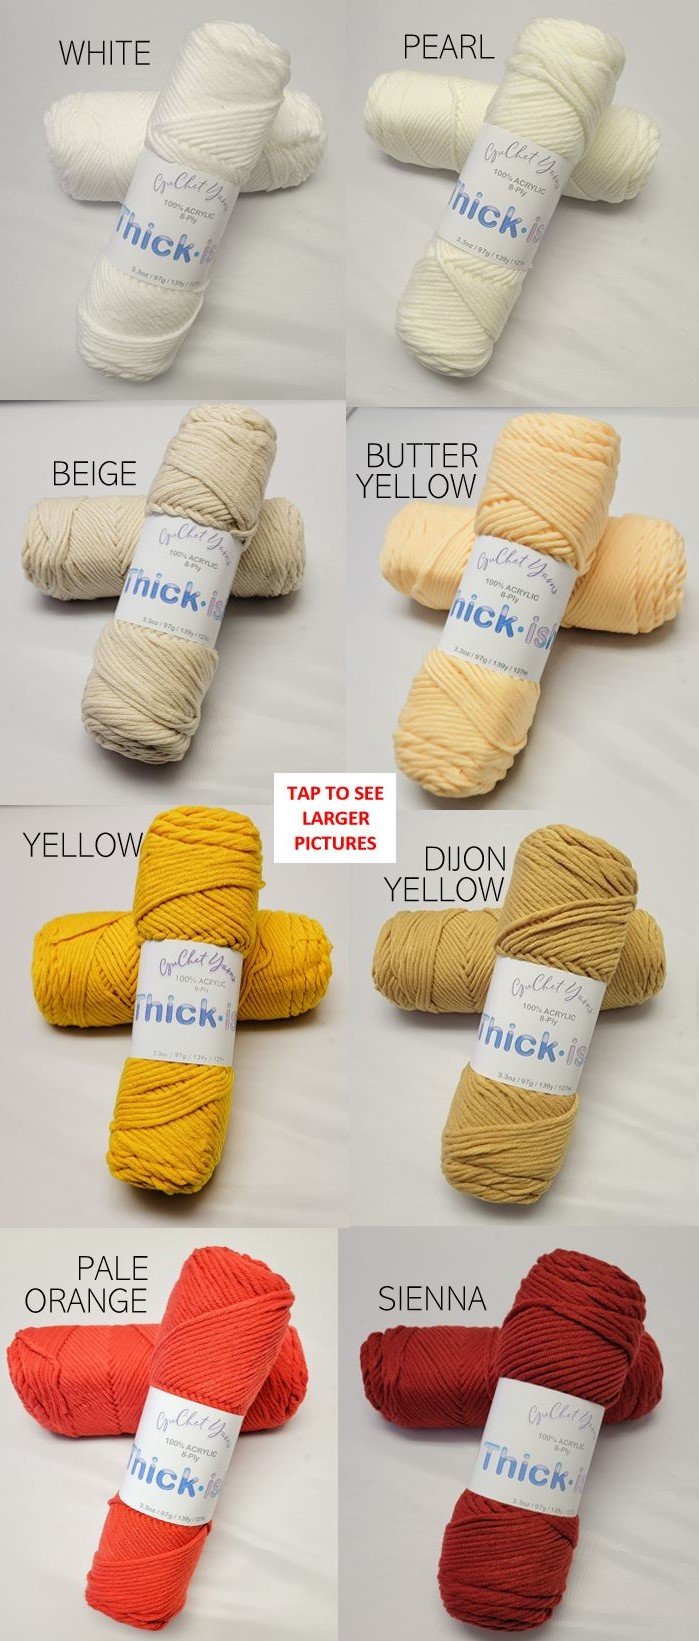 100% ACRYLIC YARN - THICK-ISH - BEING DISCONTINUED —  - Yarns,  Patterns and Accessories